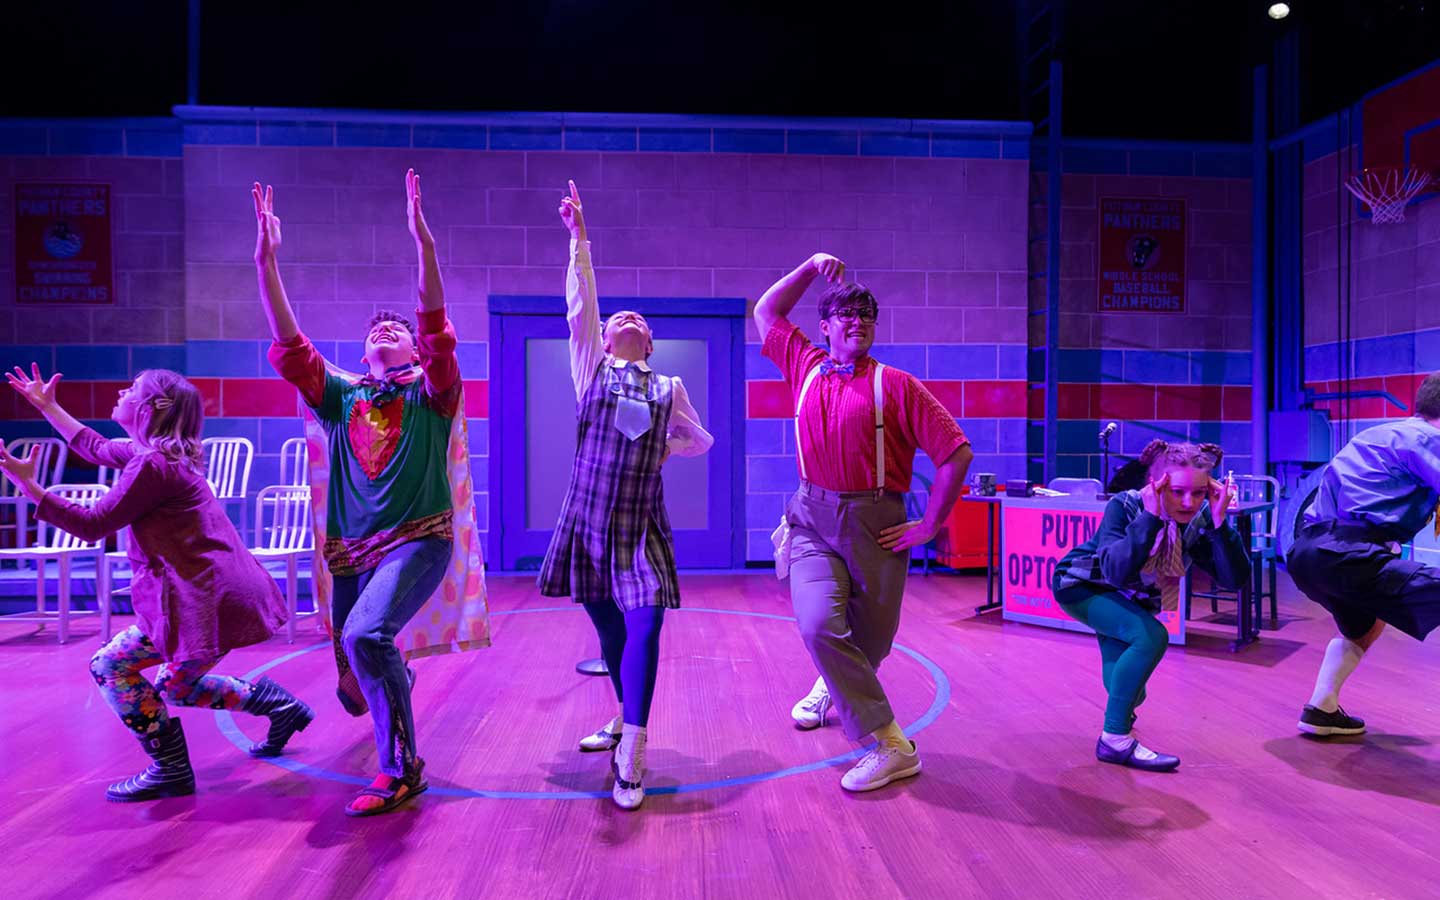 Roosevelt University students performing "The 25th Annual Putnam County Spelling Bee" in February, 2020.